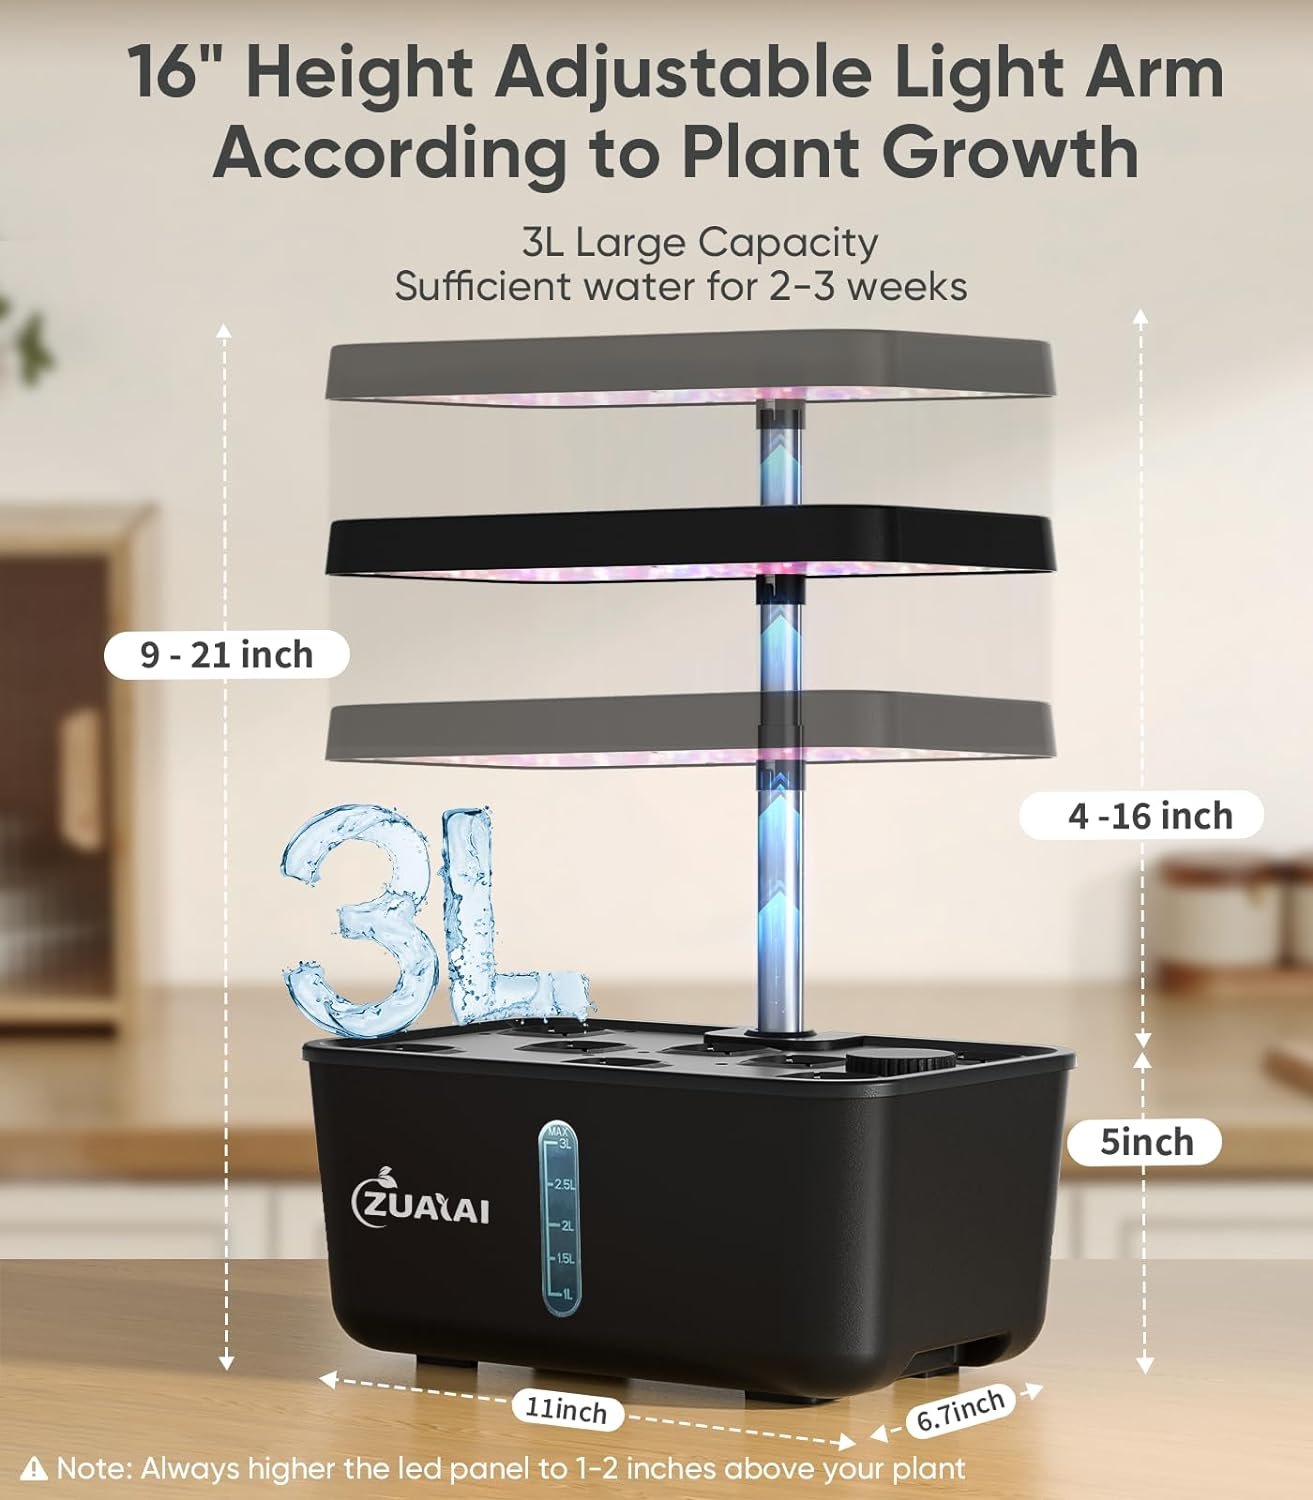 Hydroponics Growing System Indoor Garden: 8Pods Plant Germination Kit with Height Adjustable LED Grow Light, Indoor Hydroponic Growing System Herb Garden, Christmas Gifts for Women